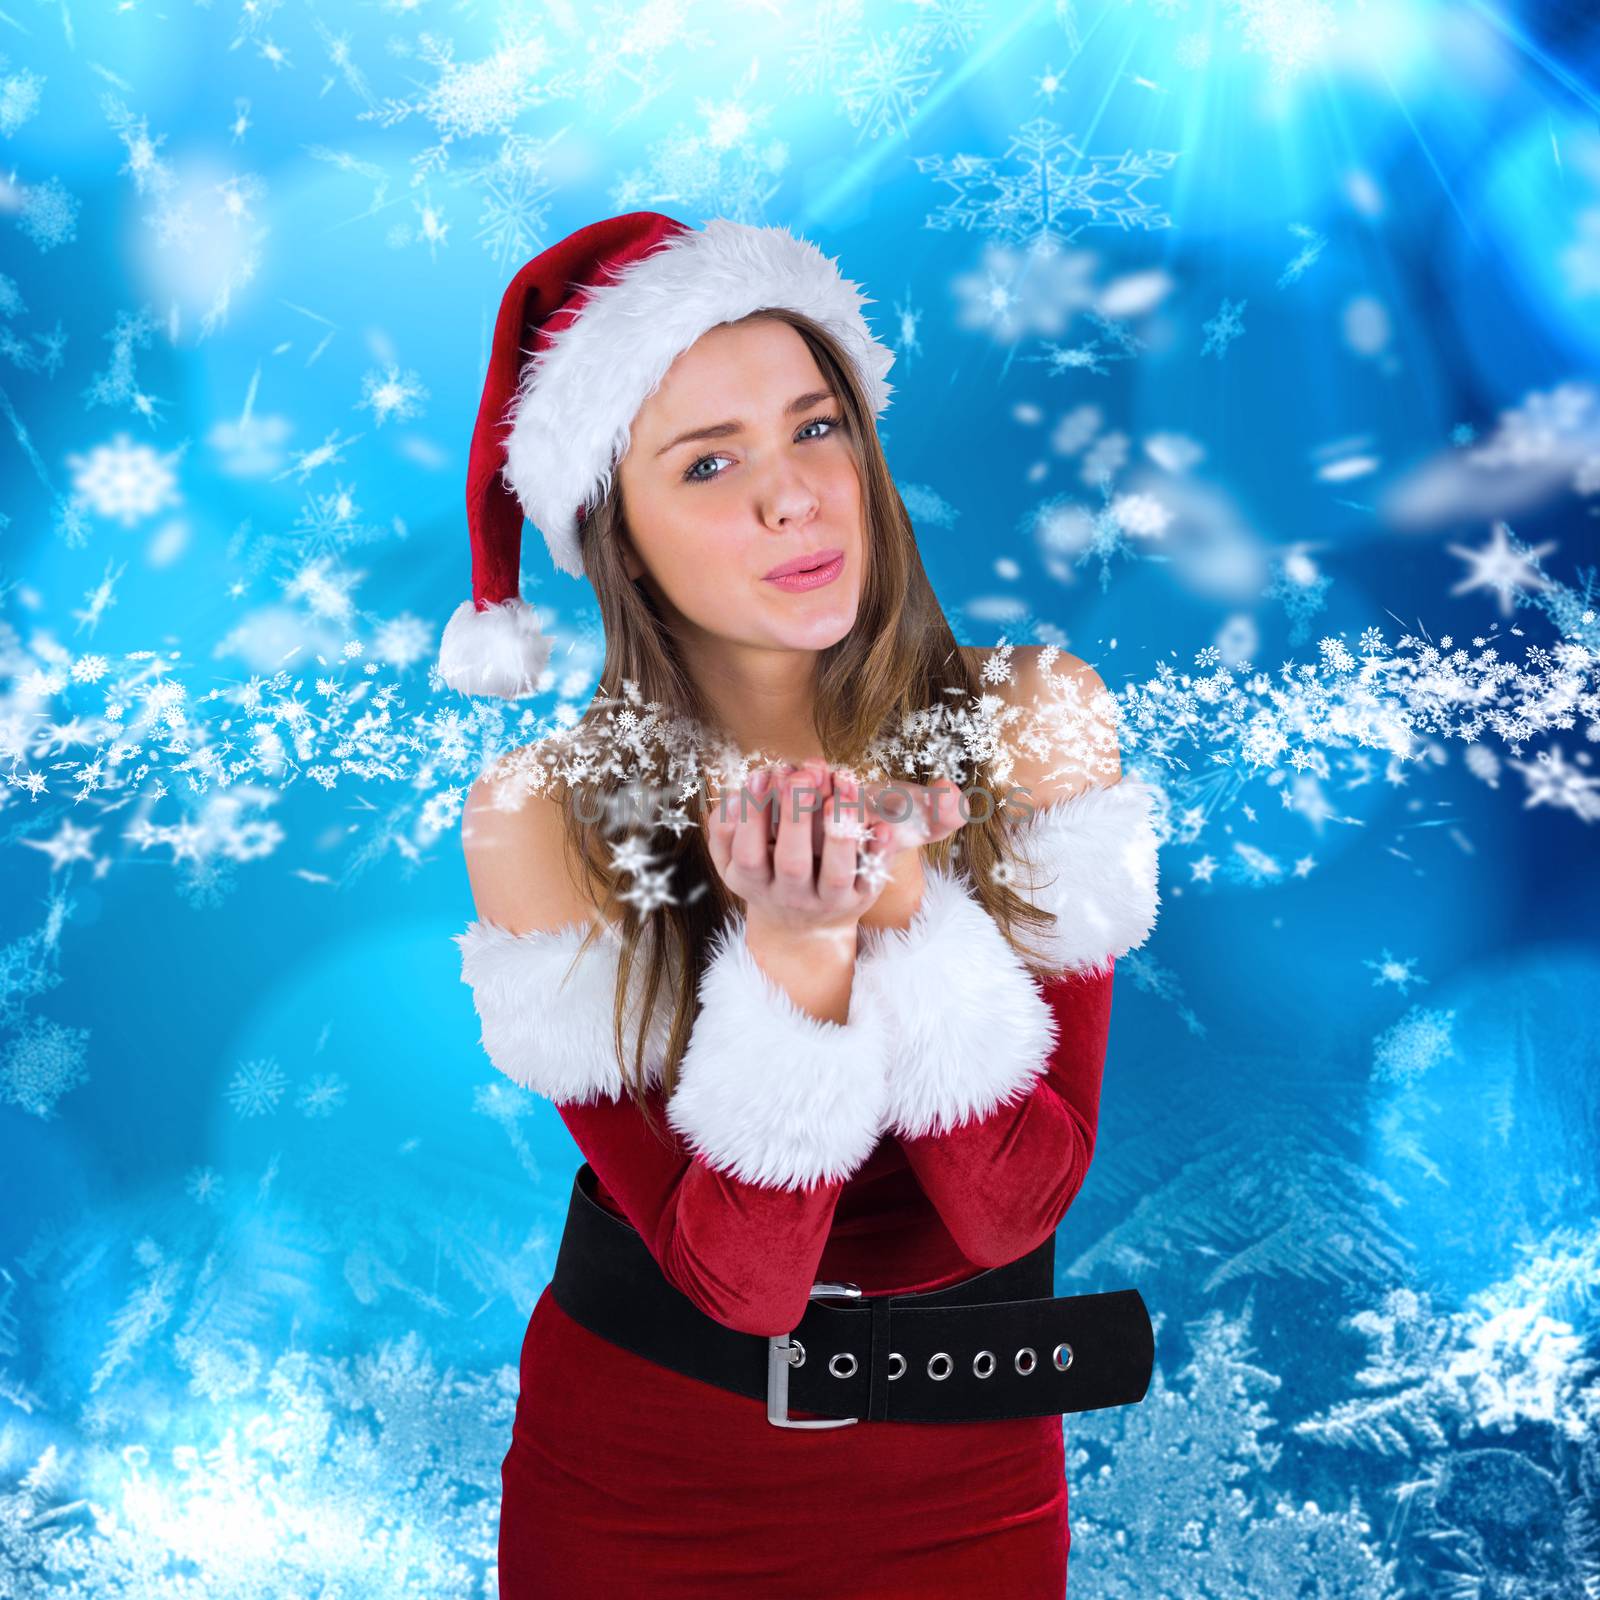 Sexy santa girl blowing over hands against blue snow flake pattern design